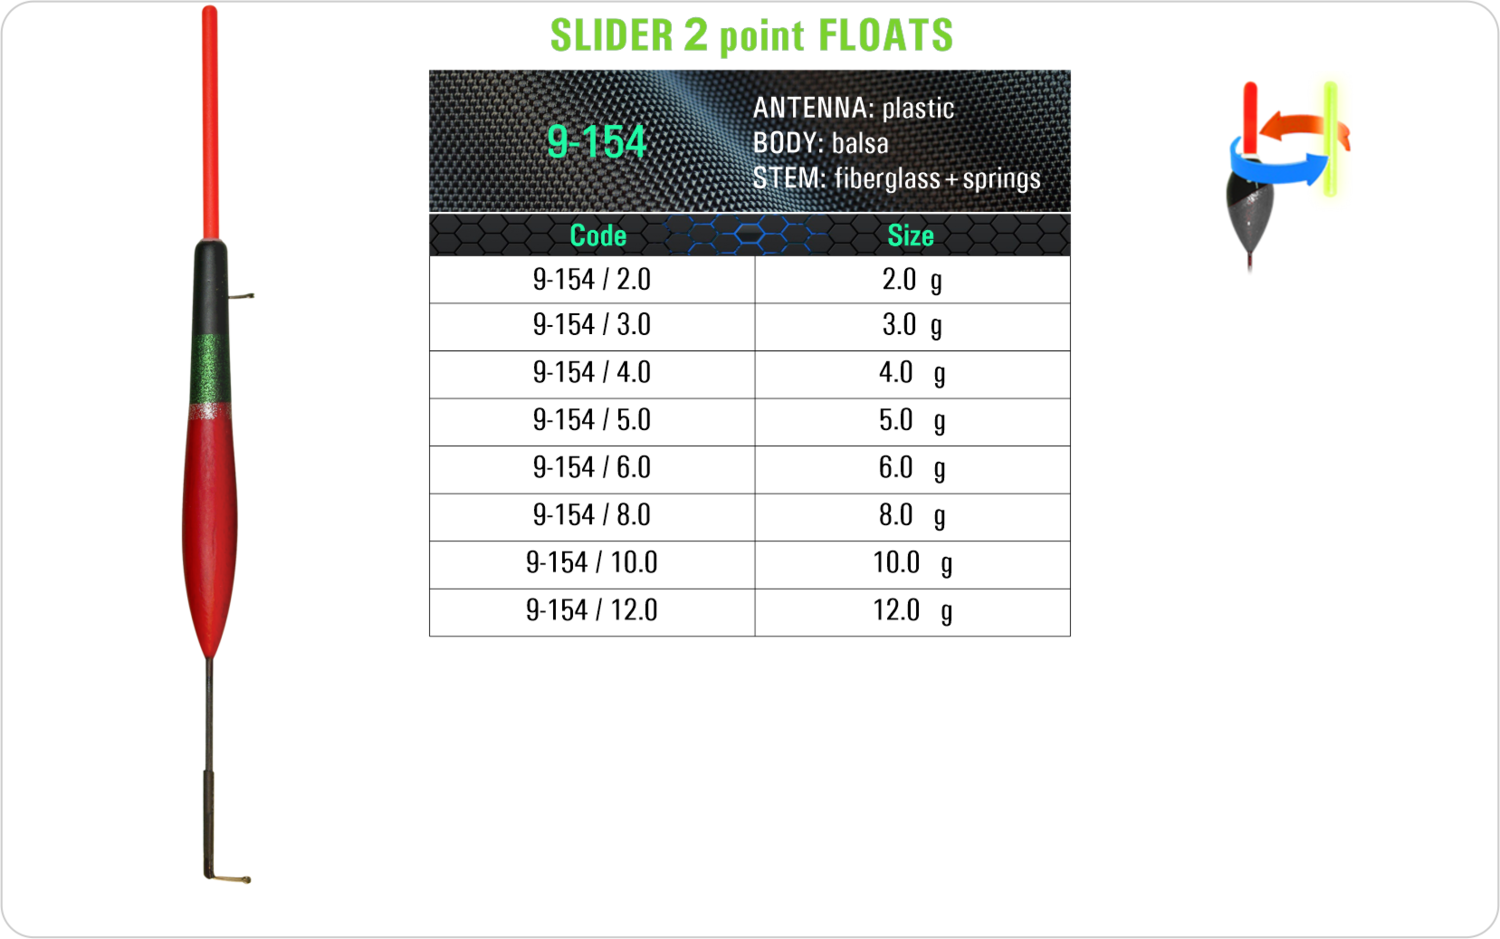 SF 9-154 - Lake and river float model and table containing an additional information about this float with different codes, sizes, types of the body, the stem and the antenna of the float.